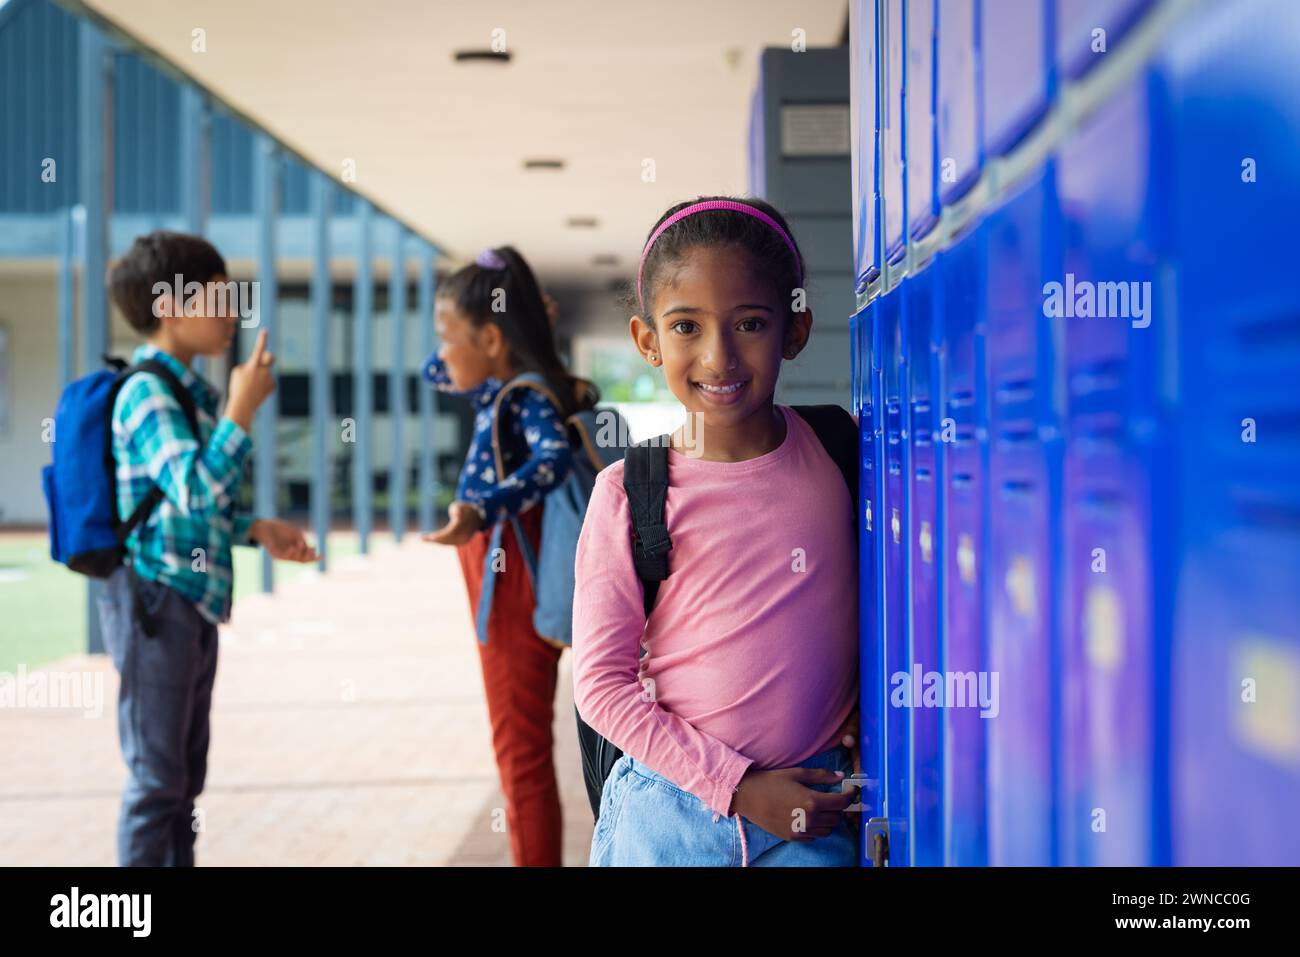 Biracial girl with a pink backpack smiles near school blue lockers, her dark hair tied back Stock Photo